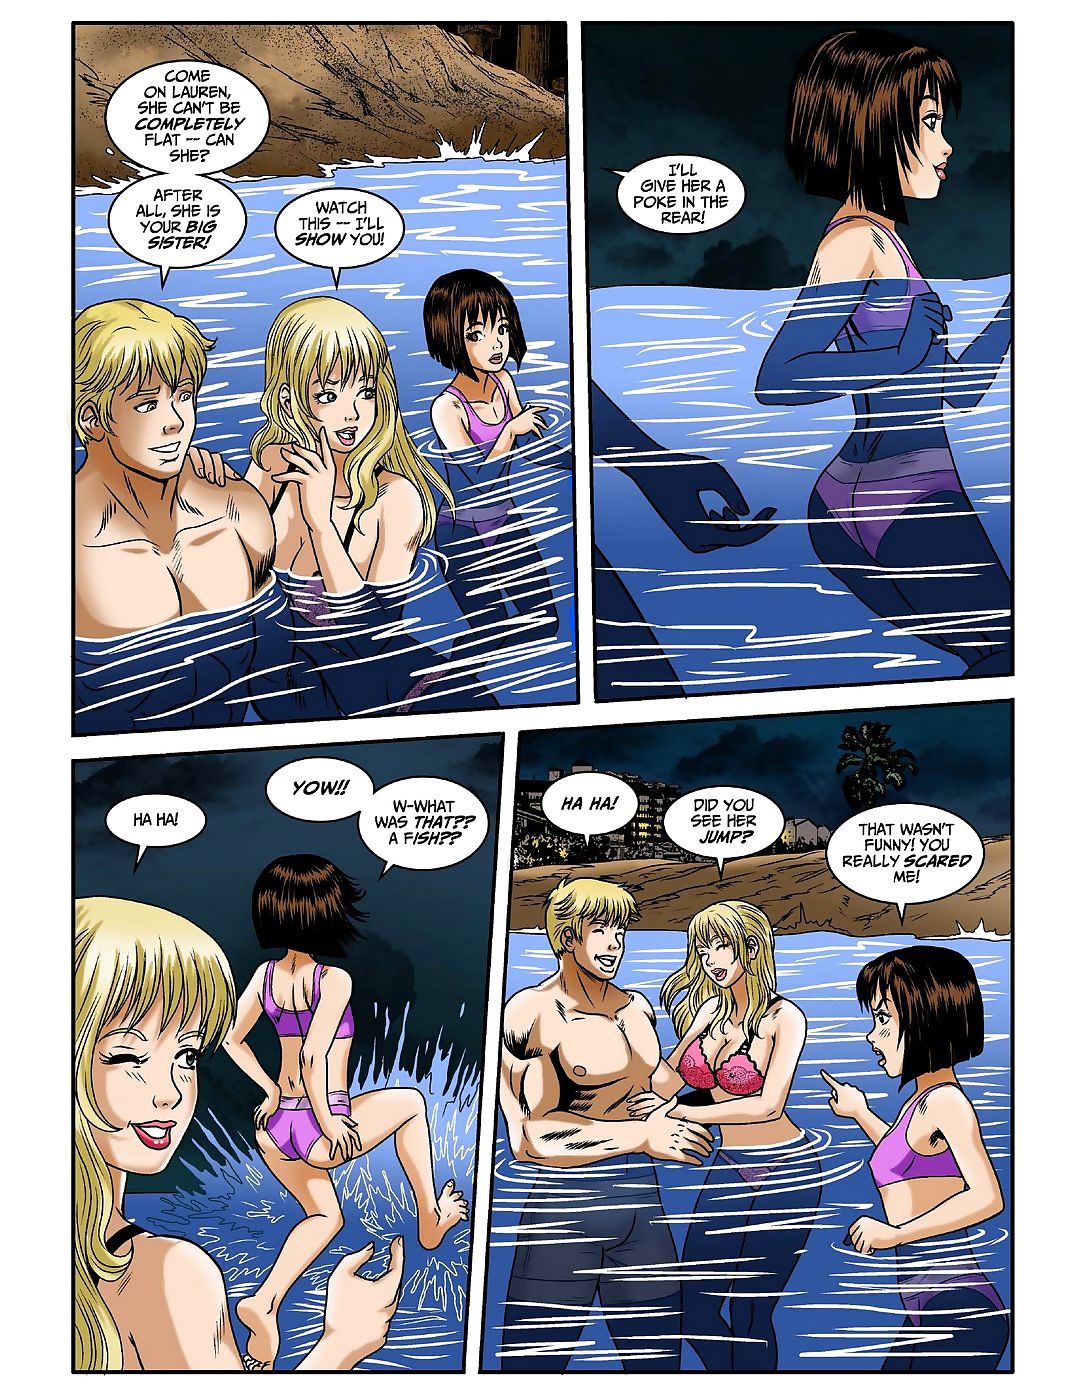 Growing Attraction 2- Dream Tales page 1